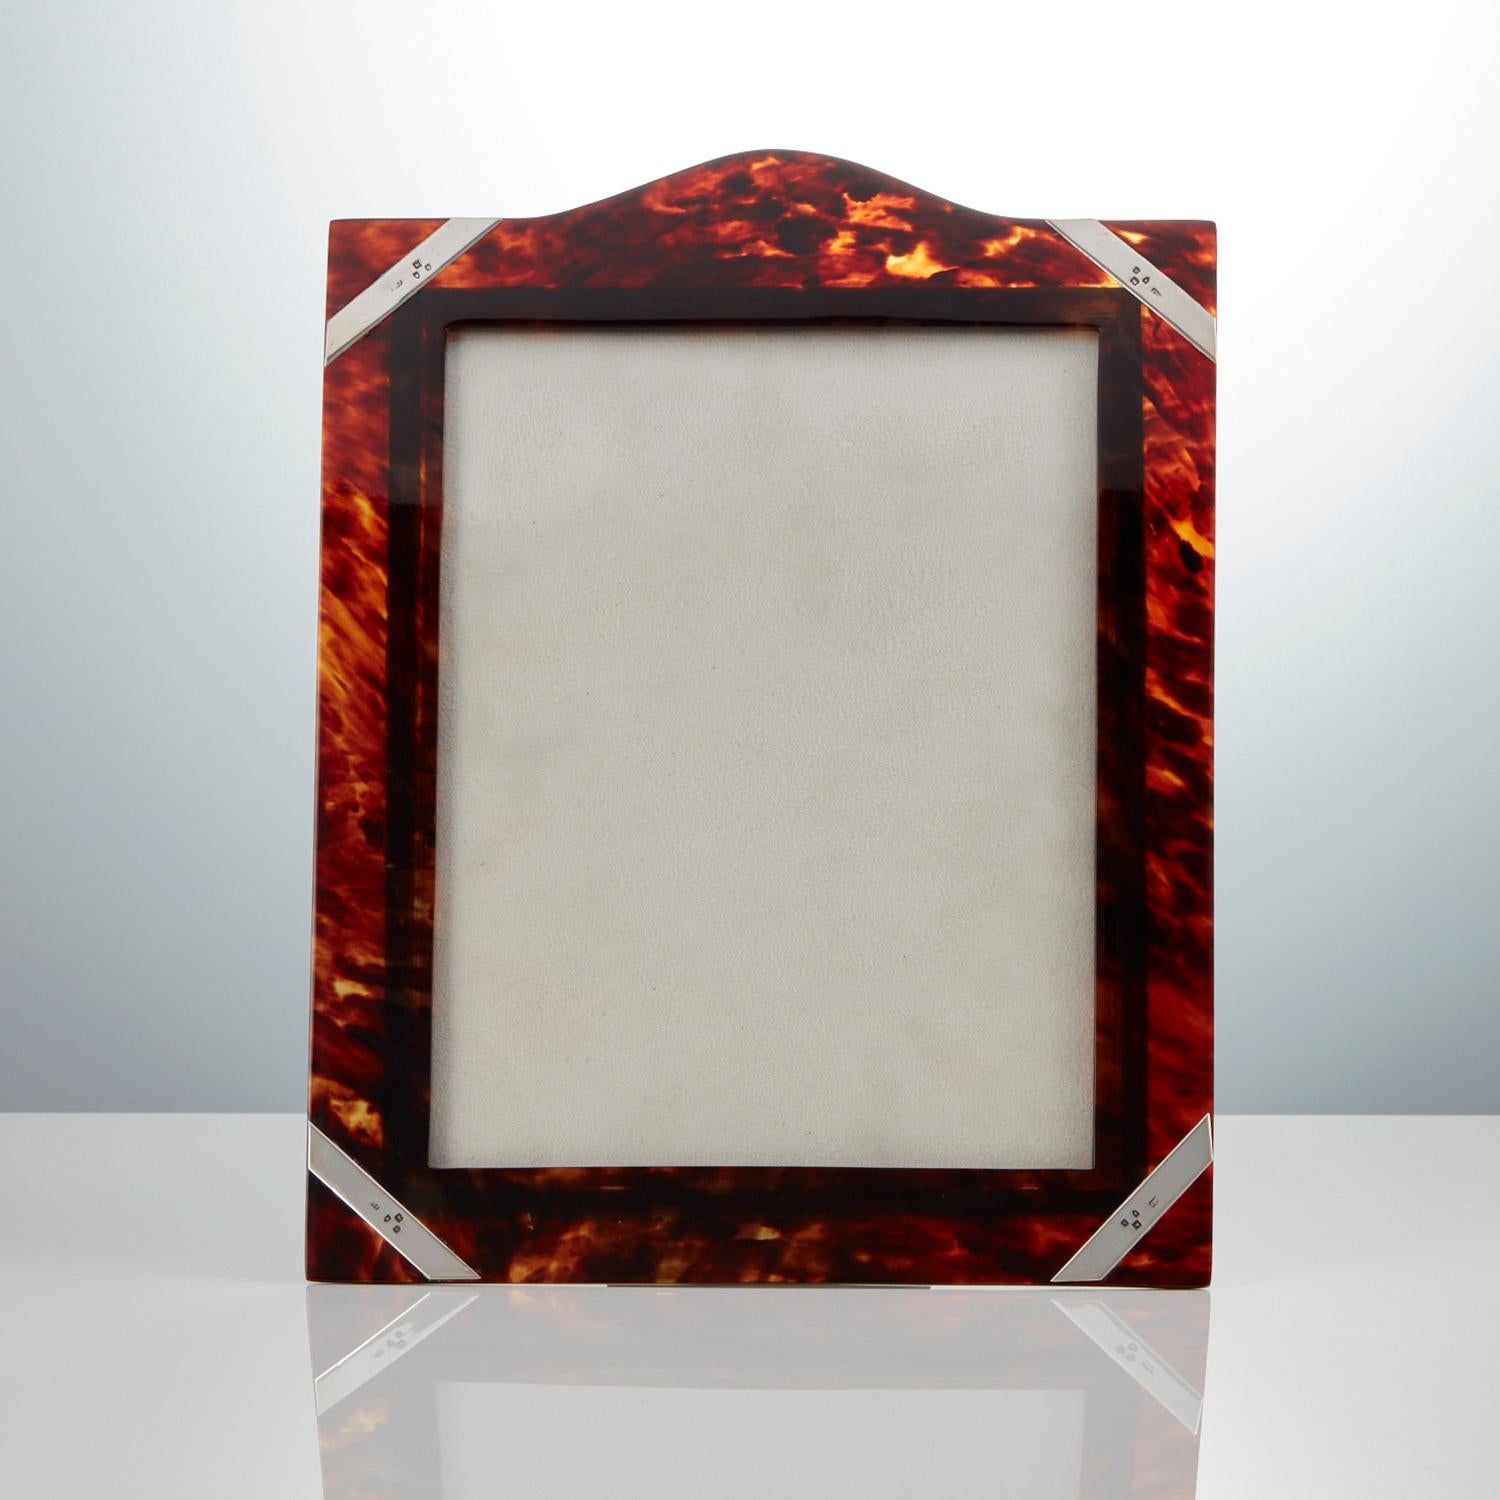 A Large Antique Tortoiseshell Photo Frame with Silver Overlay Corners dated London 1897.

This mid 19th century frame is a great size with unusual silver overlay decoration to each corner. The shell retains it’s translucent quality. This piece is